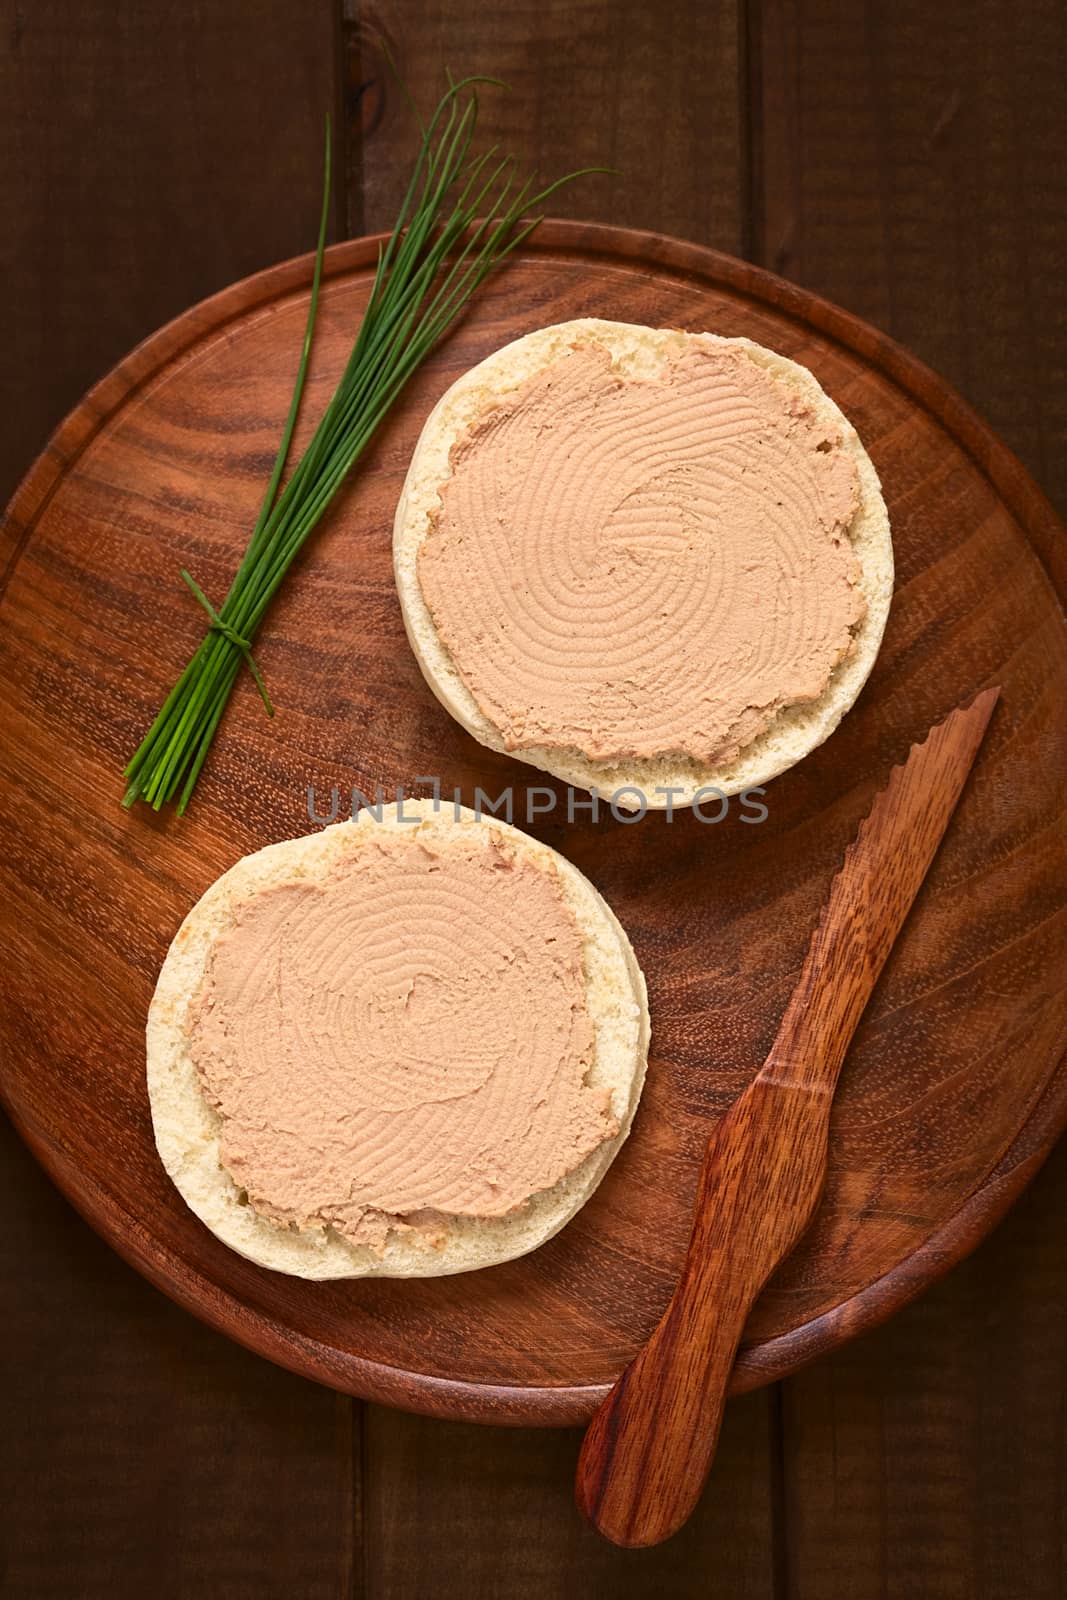 Overhead shot of liverwurst spread on bun with chives and knife on wooden plate photographed with natural light